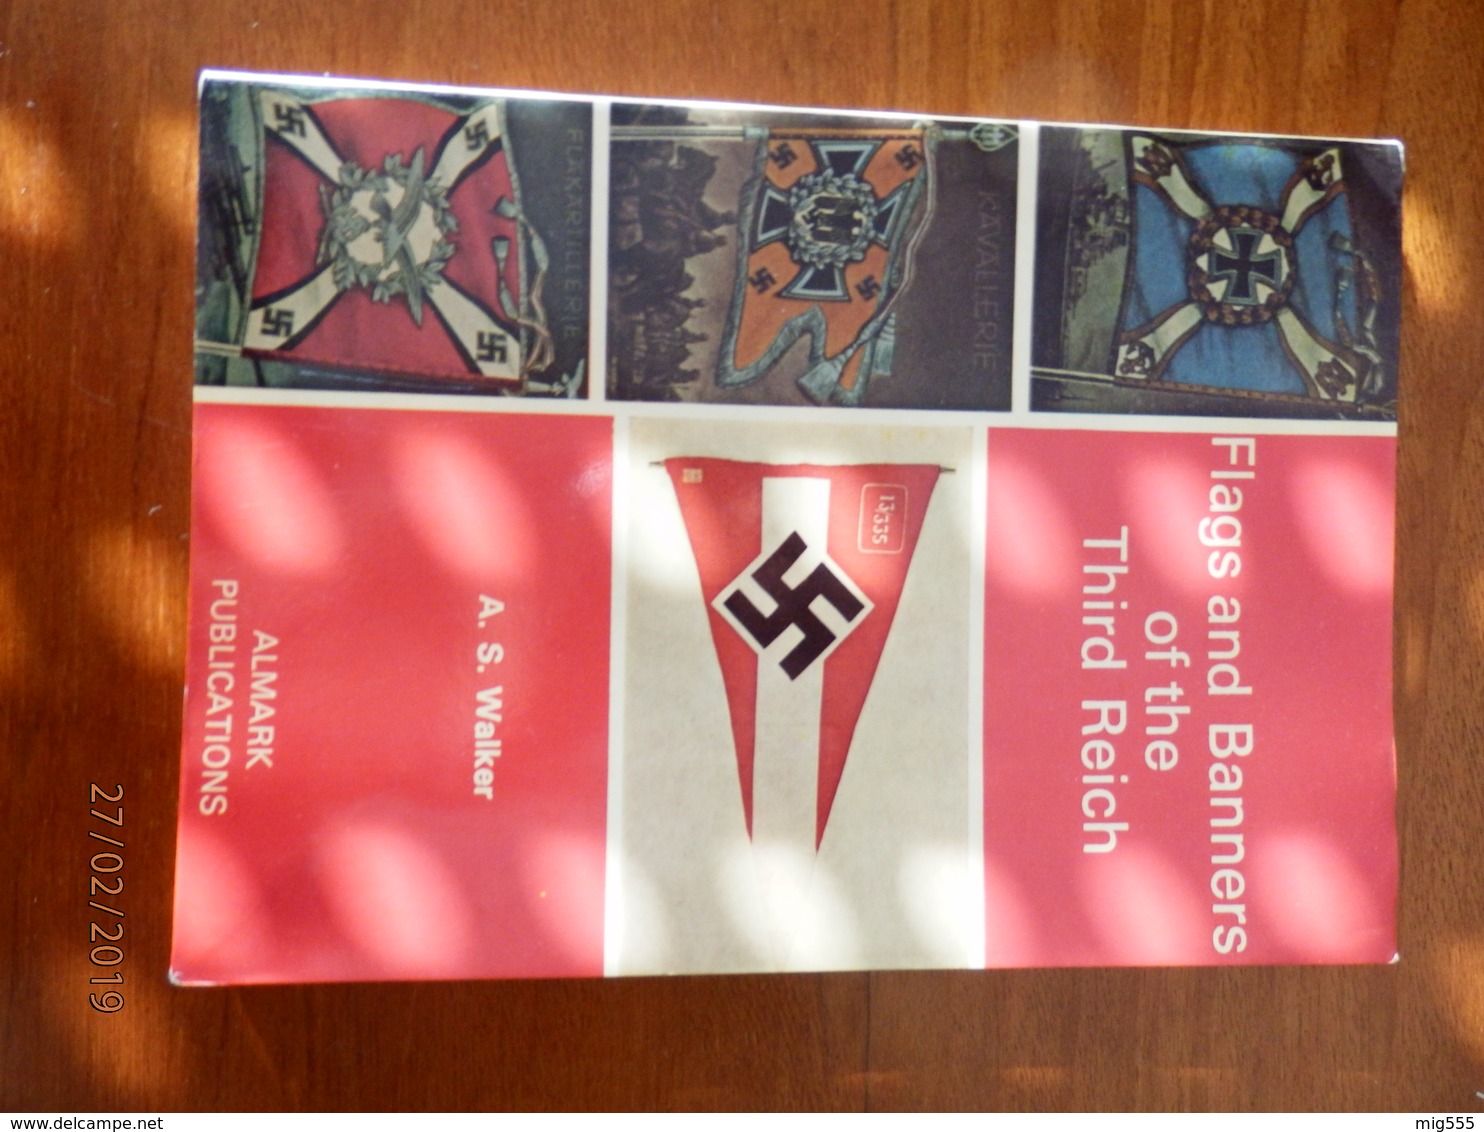 Almark Publications : FLAGS AND BANNERS OF THE THIRD REICH  By A.S. Walker - 1939-45